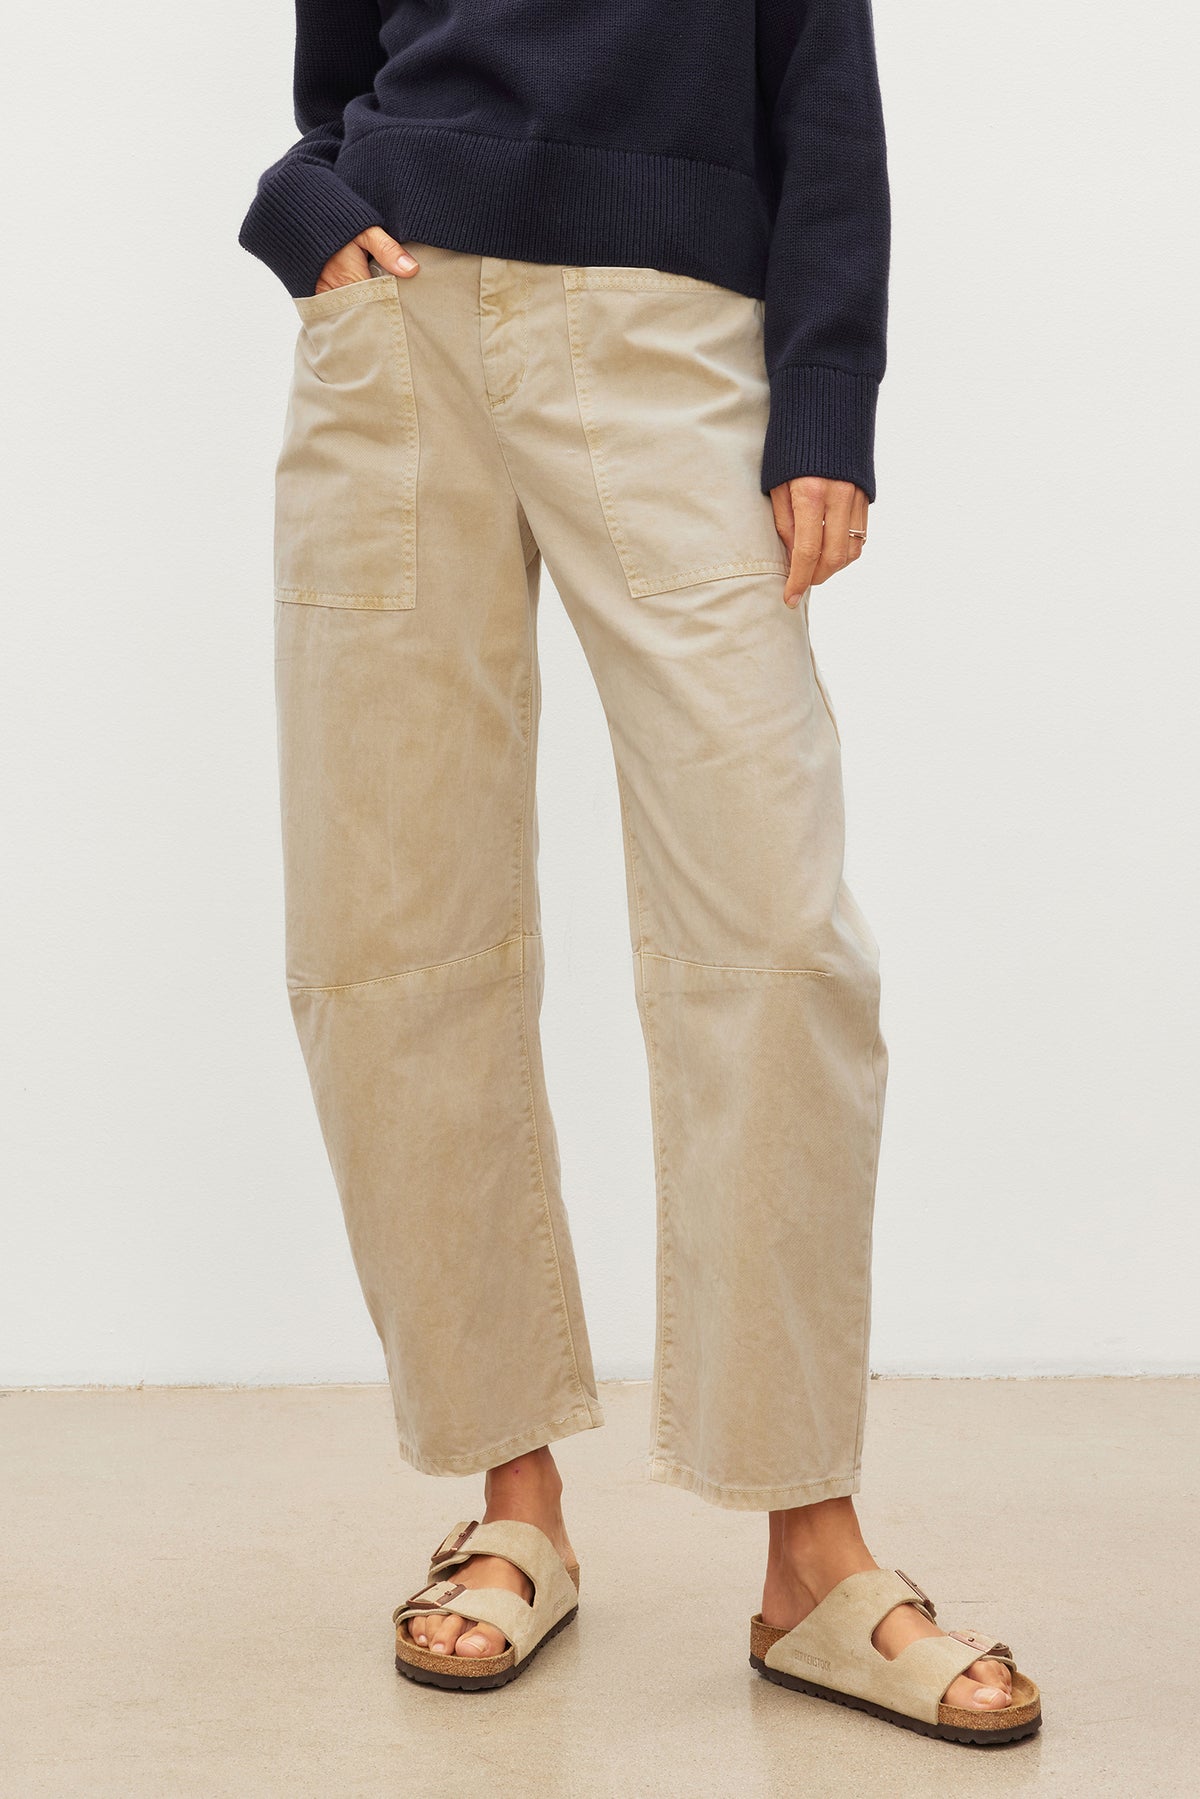 The model is wearing beige BRYLIE SANDED TWILL UTILITY PANT made by Velvet by Graham & Spencer.-35955673825473